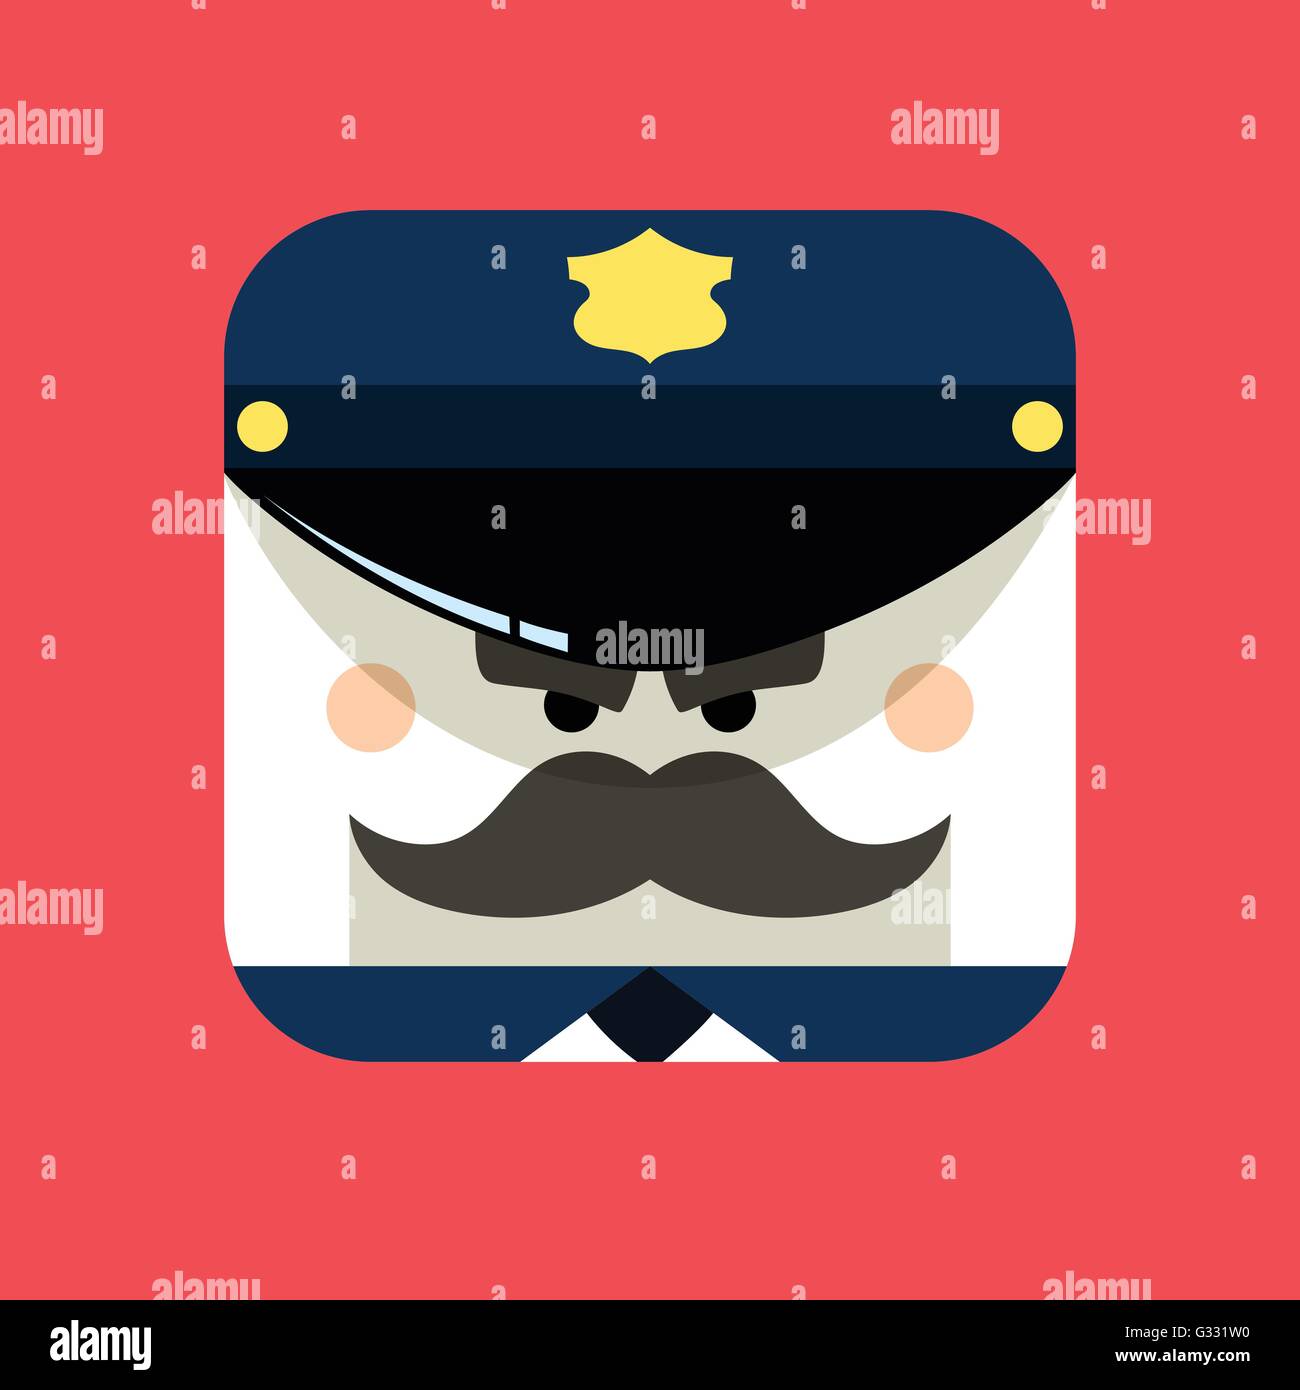 Police officer avatar illustration. Trendy policeman icon in flat style. Stock Vector